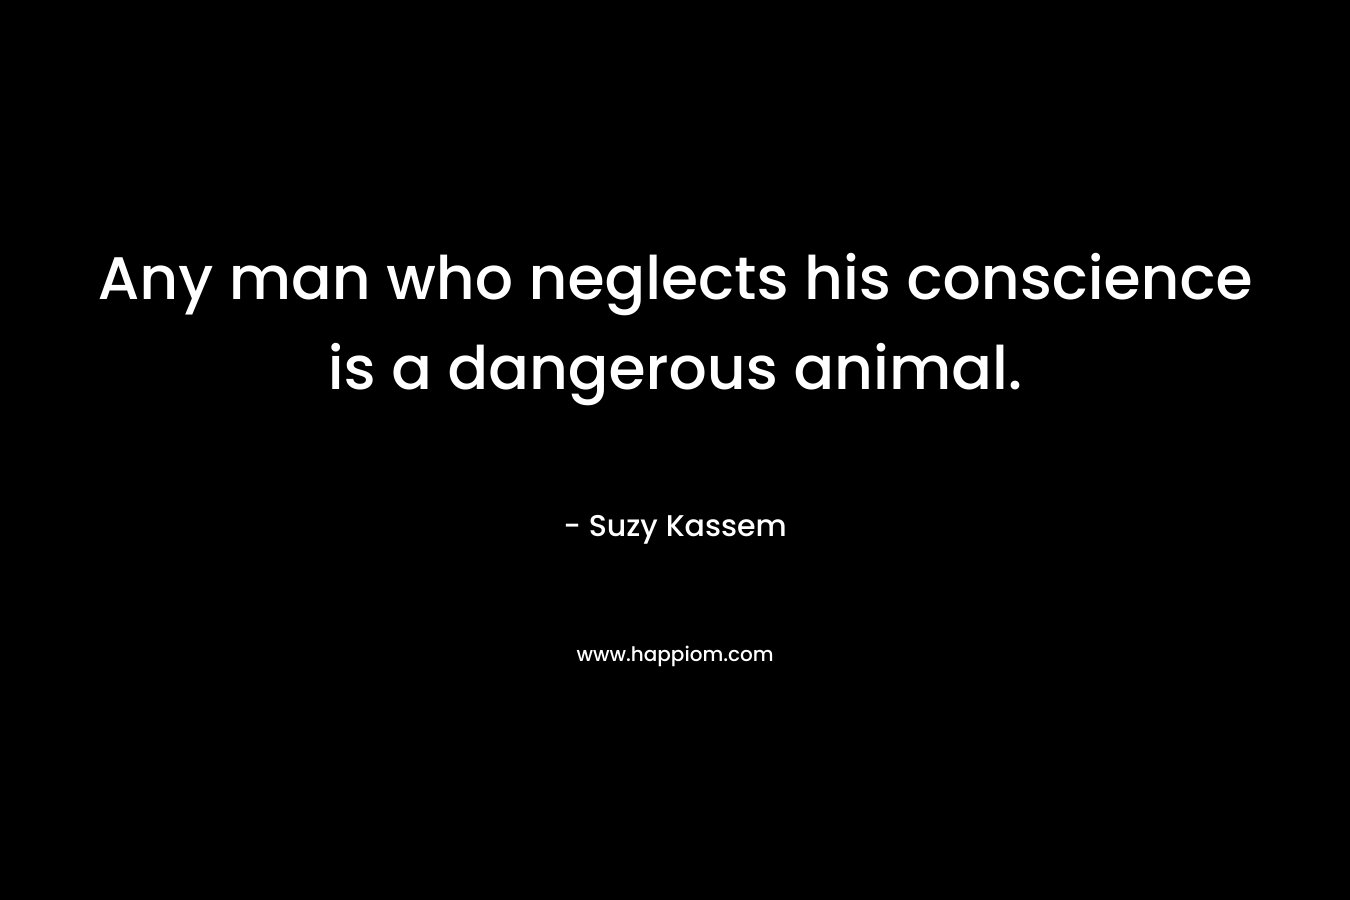 Any man who neglects his conscience is a dangerous animal.